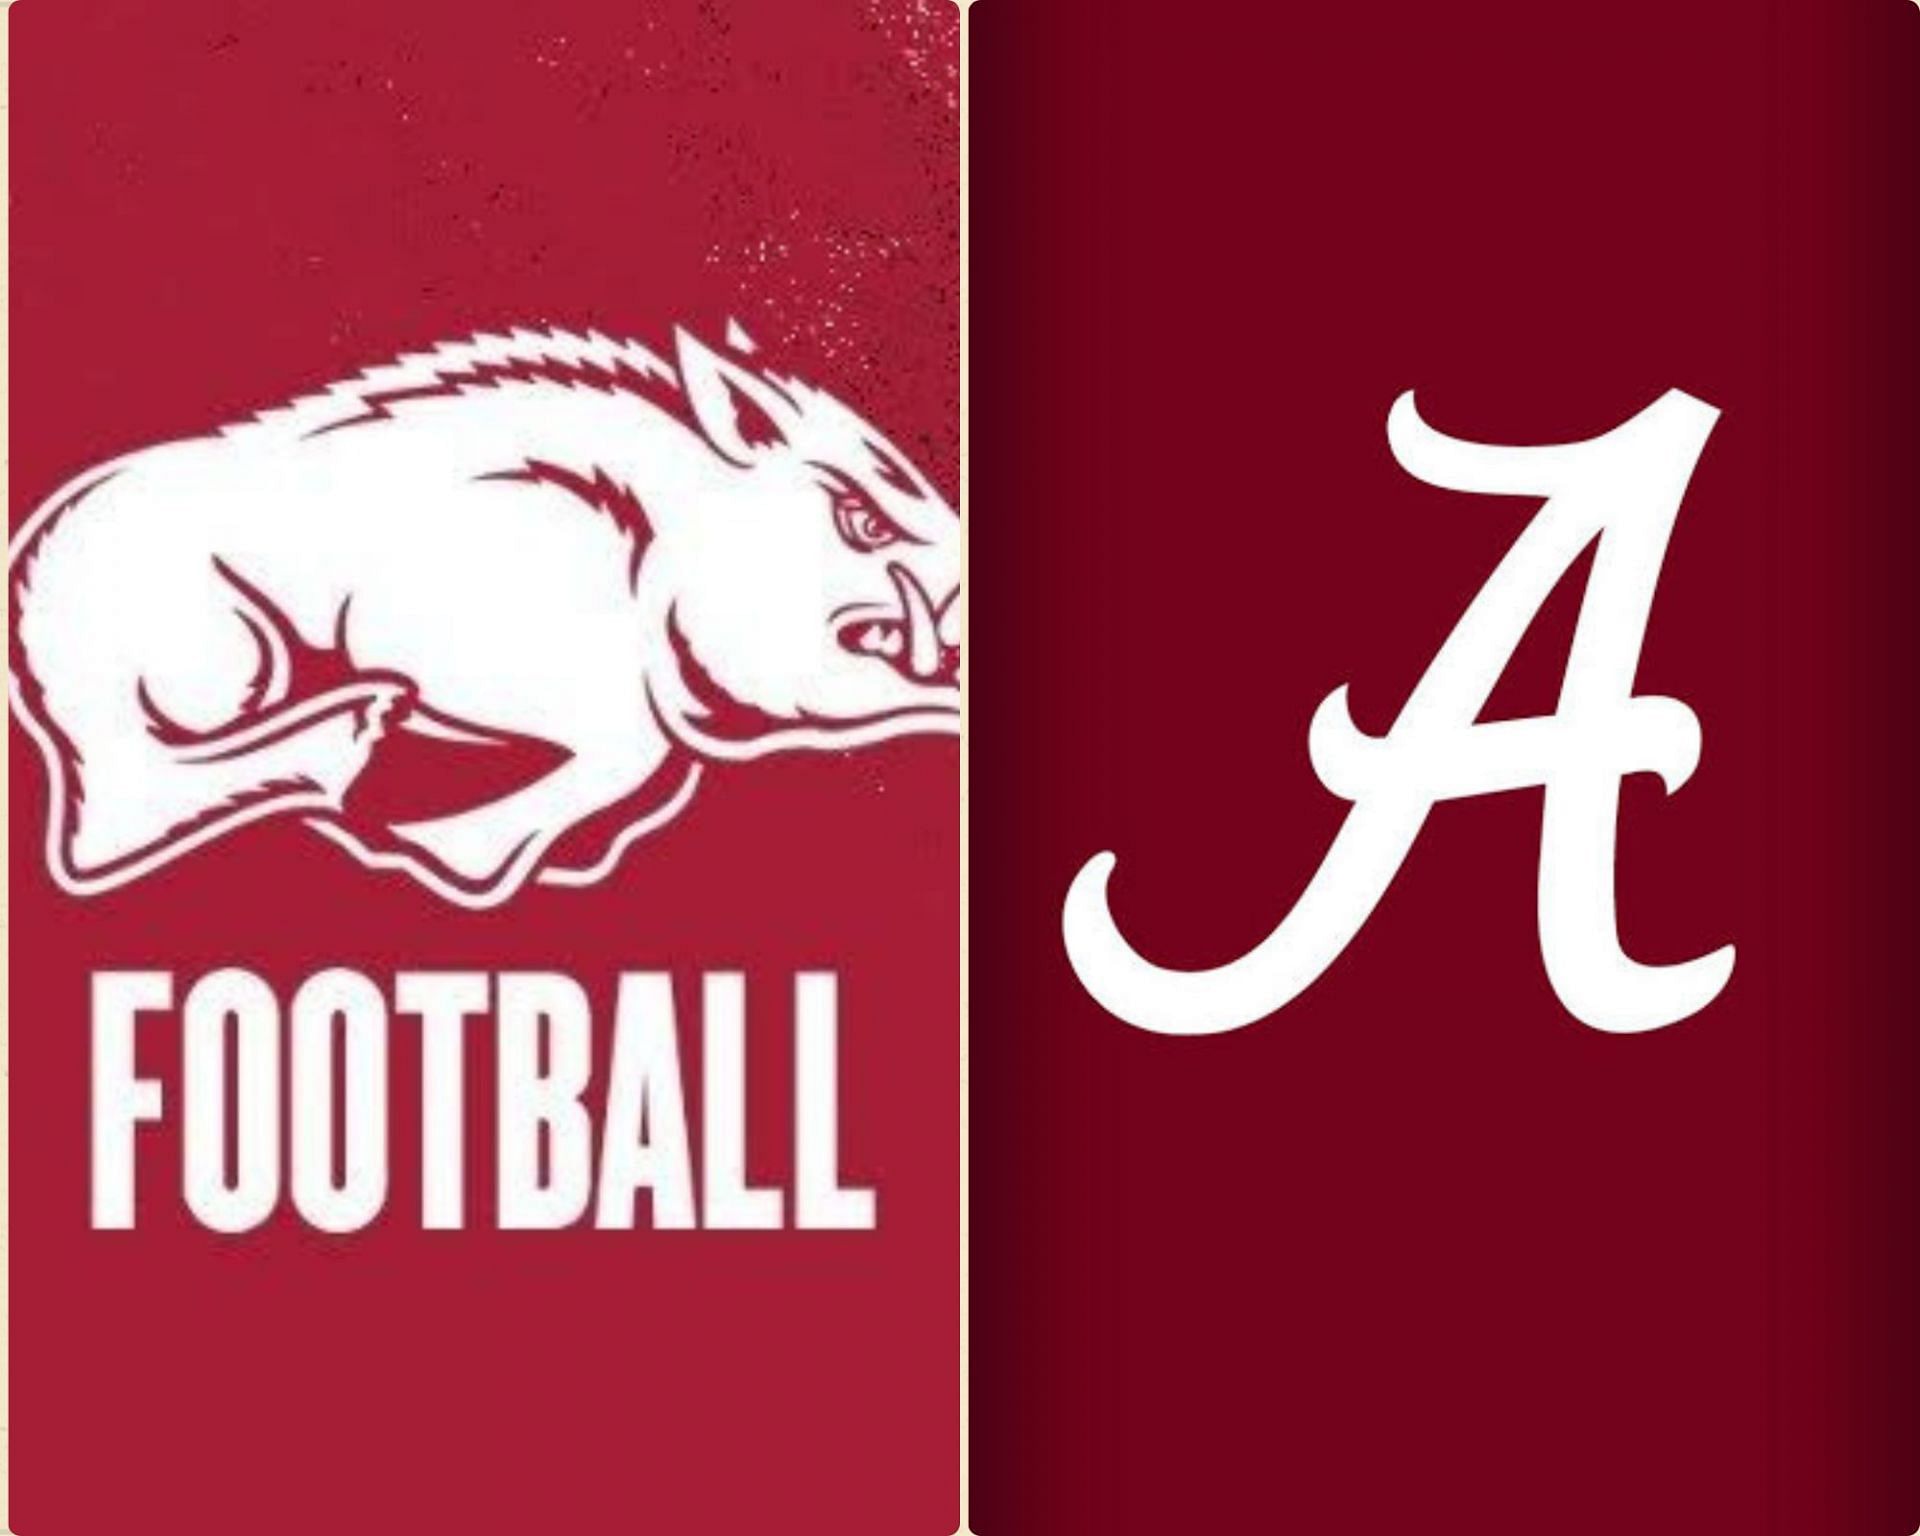 Arkansas has not gotten a win against Alabama in over a decade 